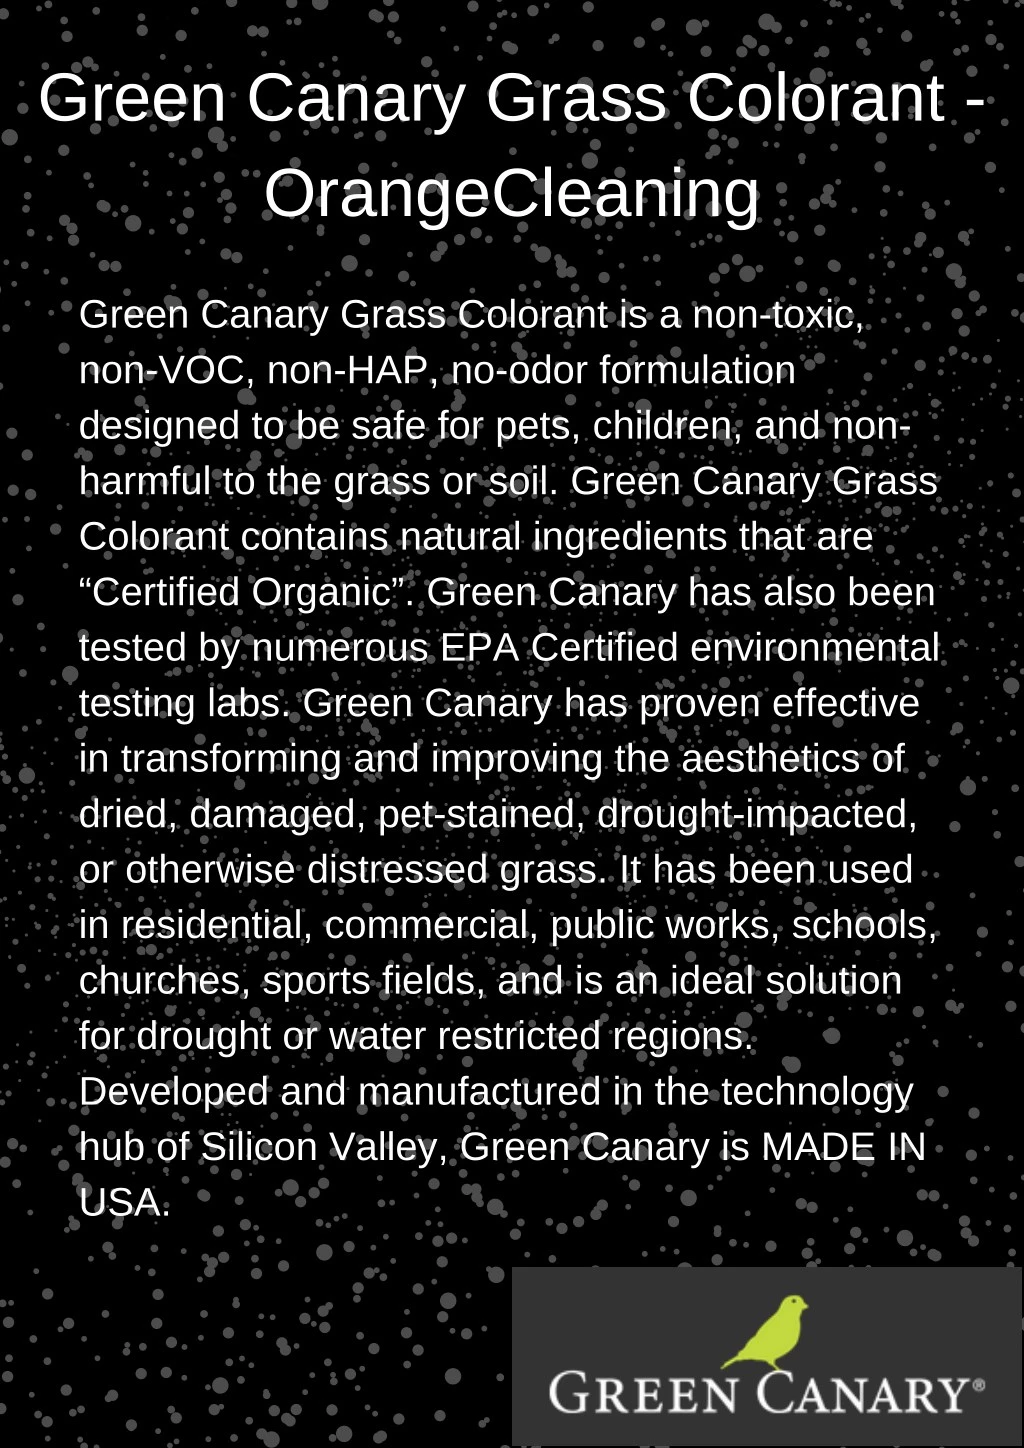 green canary grass colorant orangecleaning n.